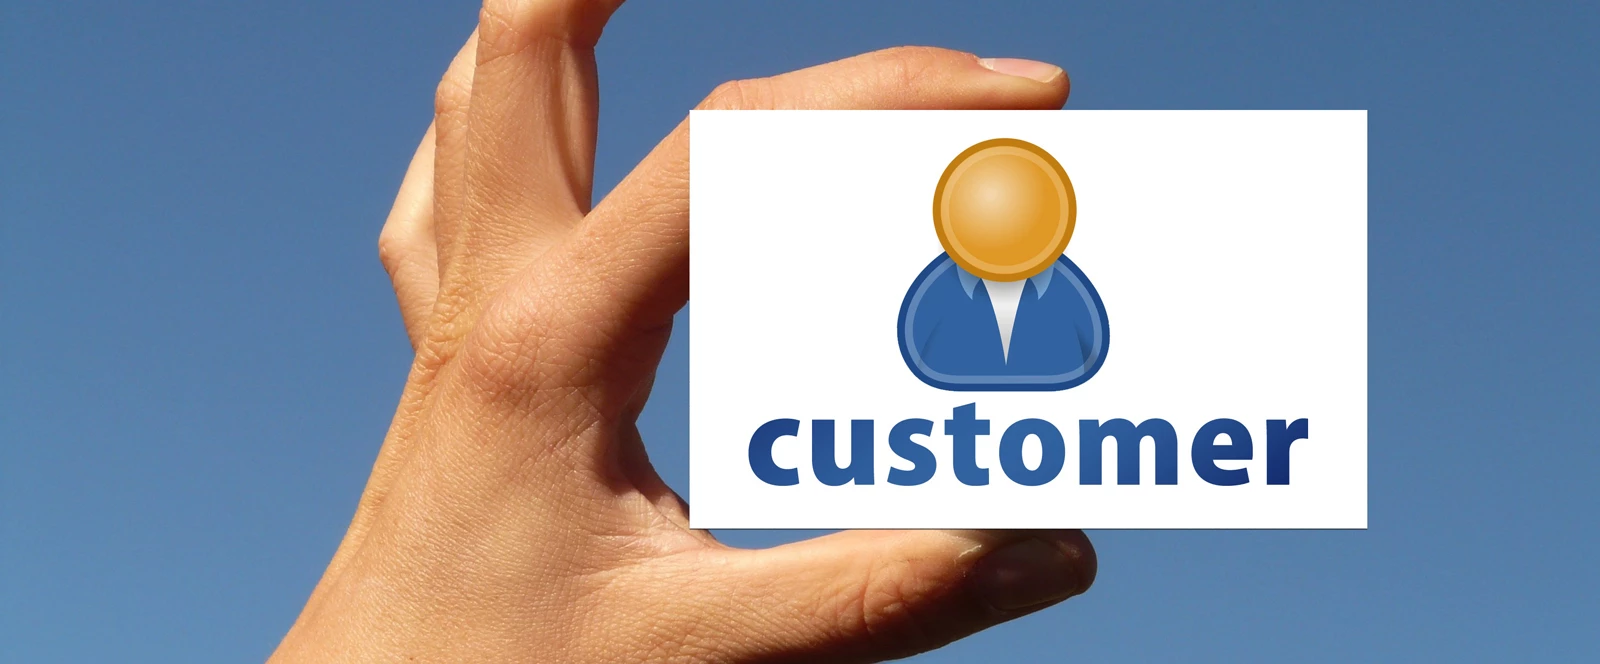 A hand holding a customer icon against a blue sky